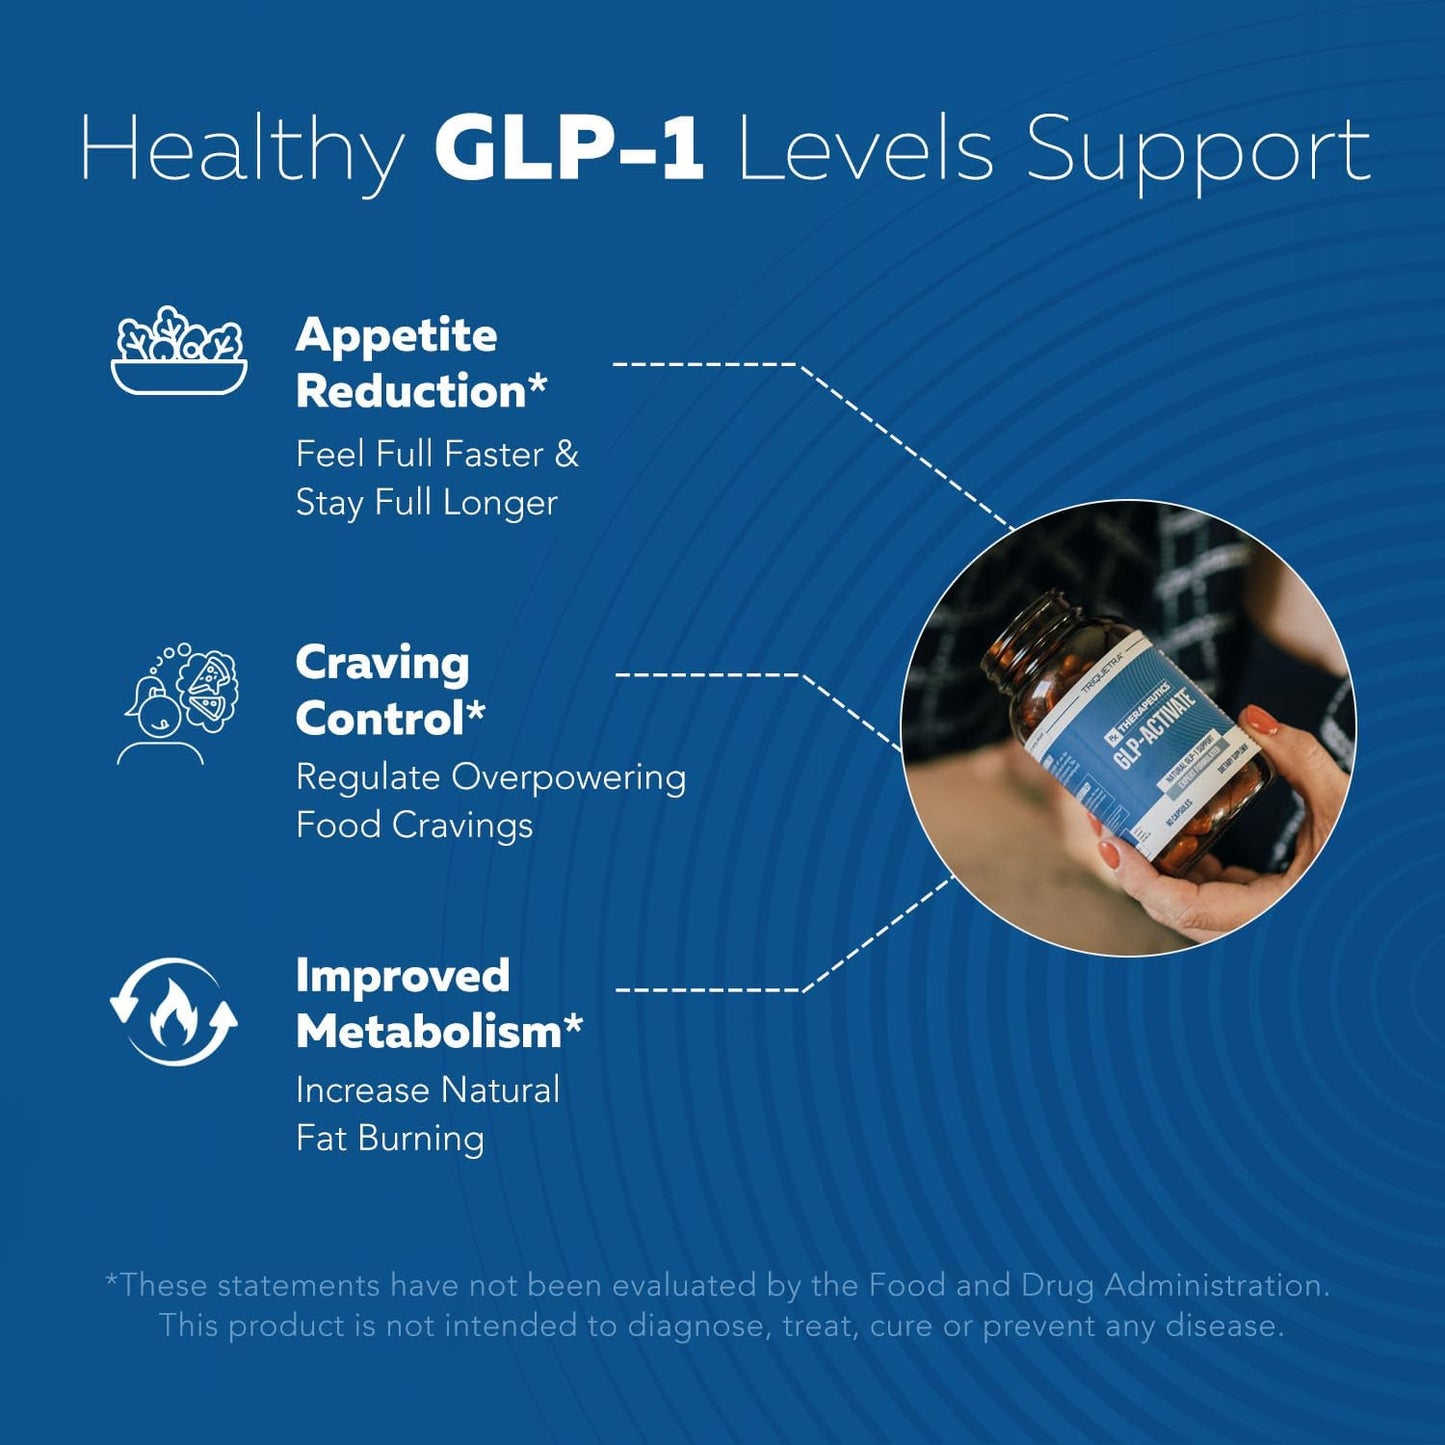 GLP-Activate | Appetite & Metabolism Support - Formulated to Support GLP1 Naturally - Expert Formulated - Take 1 Capsule Before Each Meal for Appetite & Metabolic Support - 90 Servings